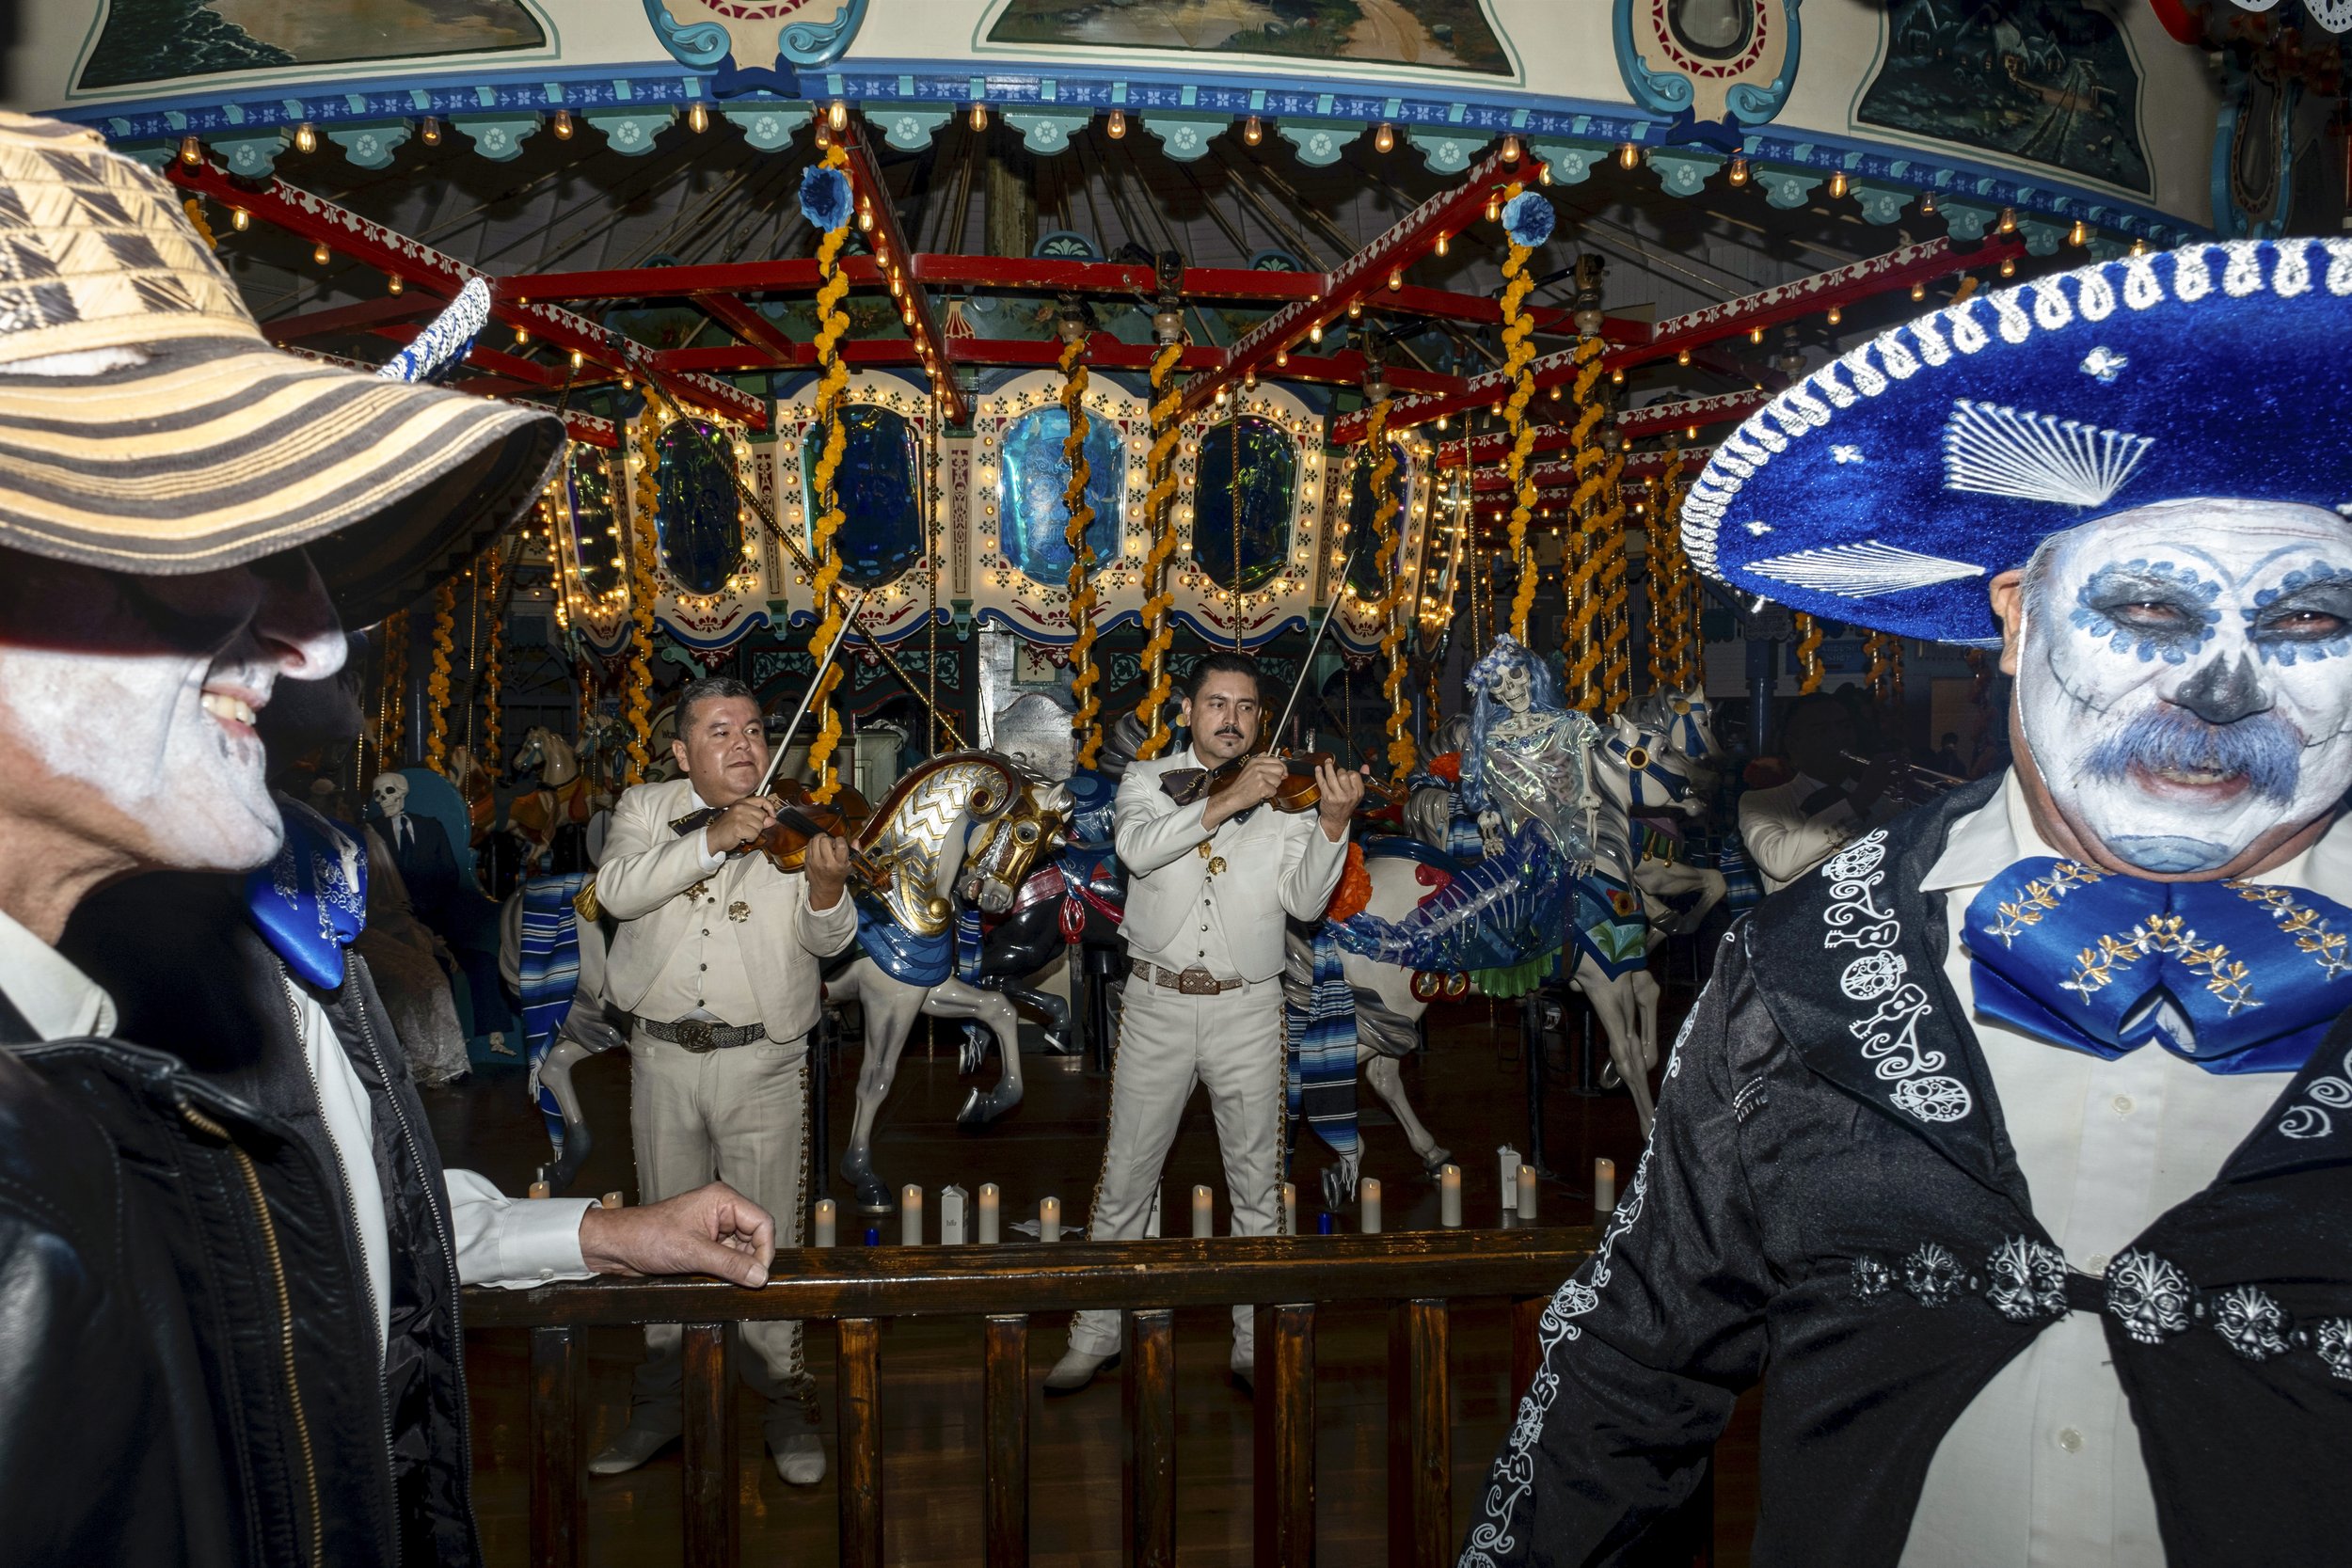  Mariachi Tenamaxtlan de Jalisco performed a variety of songs, as they made their way around the carousel to perform to the crowd of people who gathered to celebrate the Day of the Dead on November 2.  Pablo De La Rosa smiled (right) as Mariachi Tena